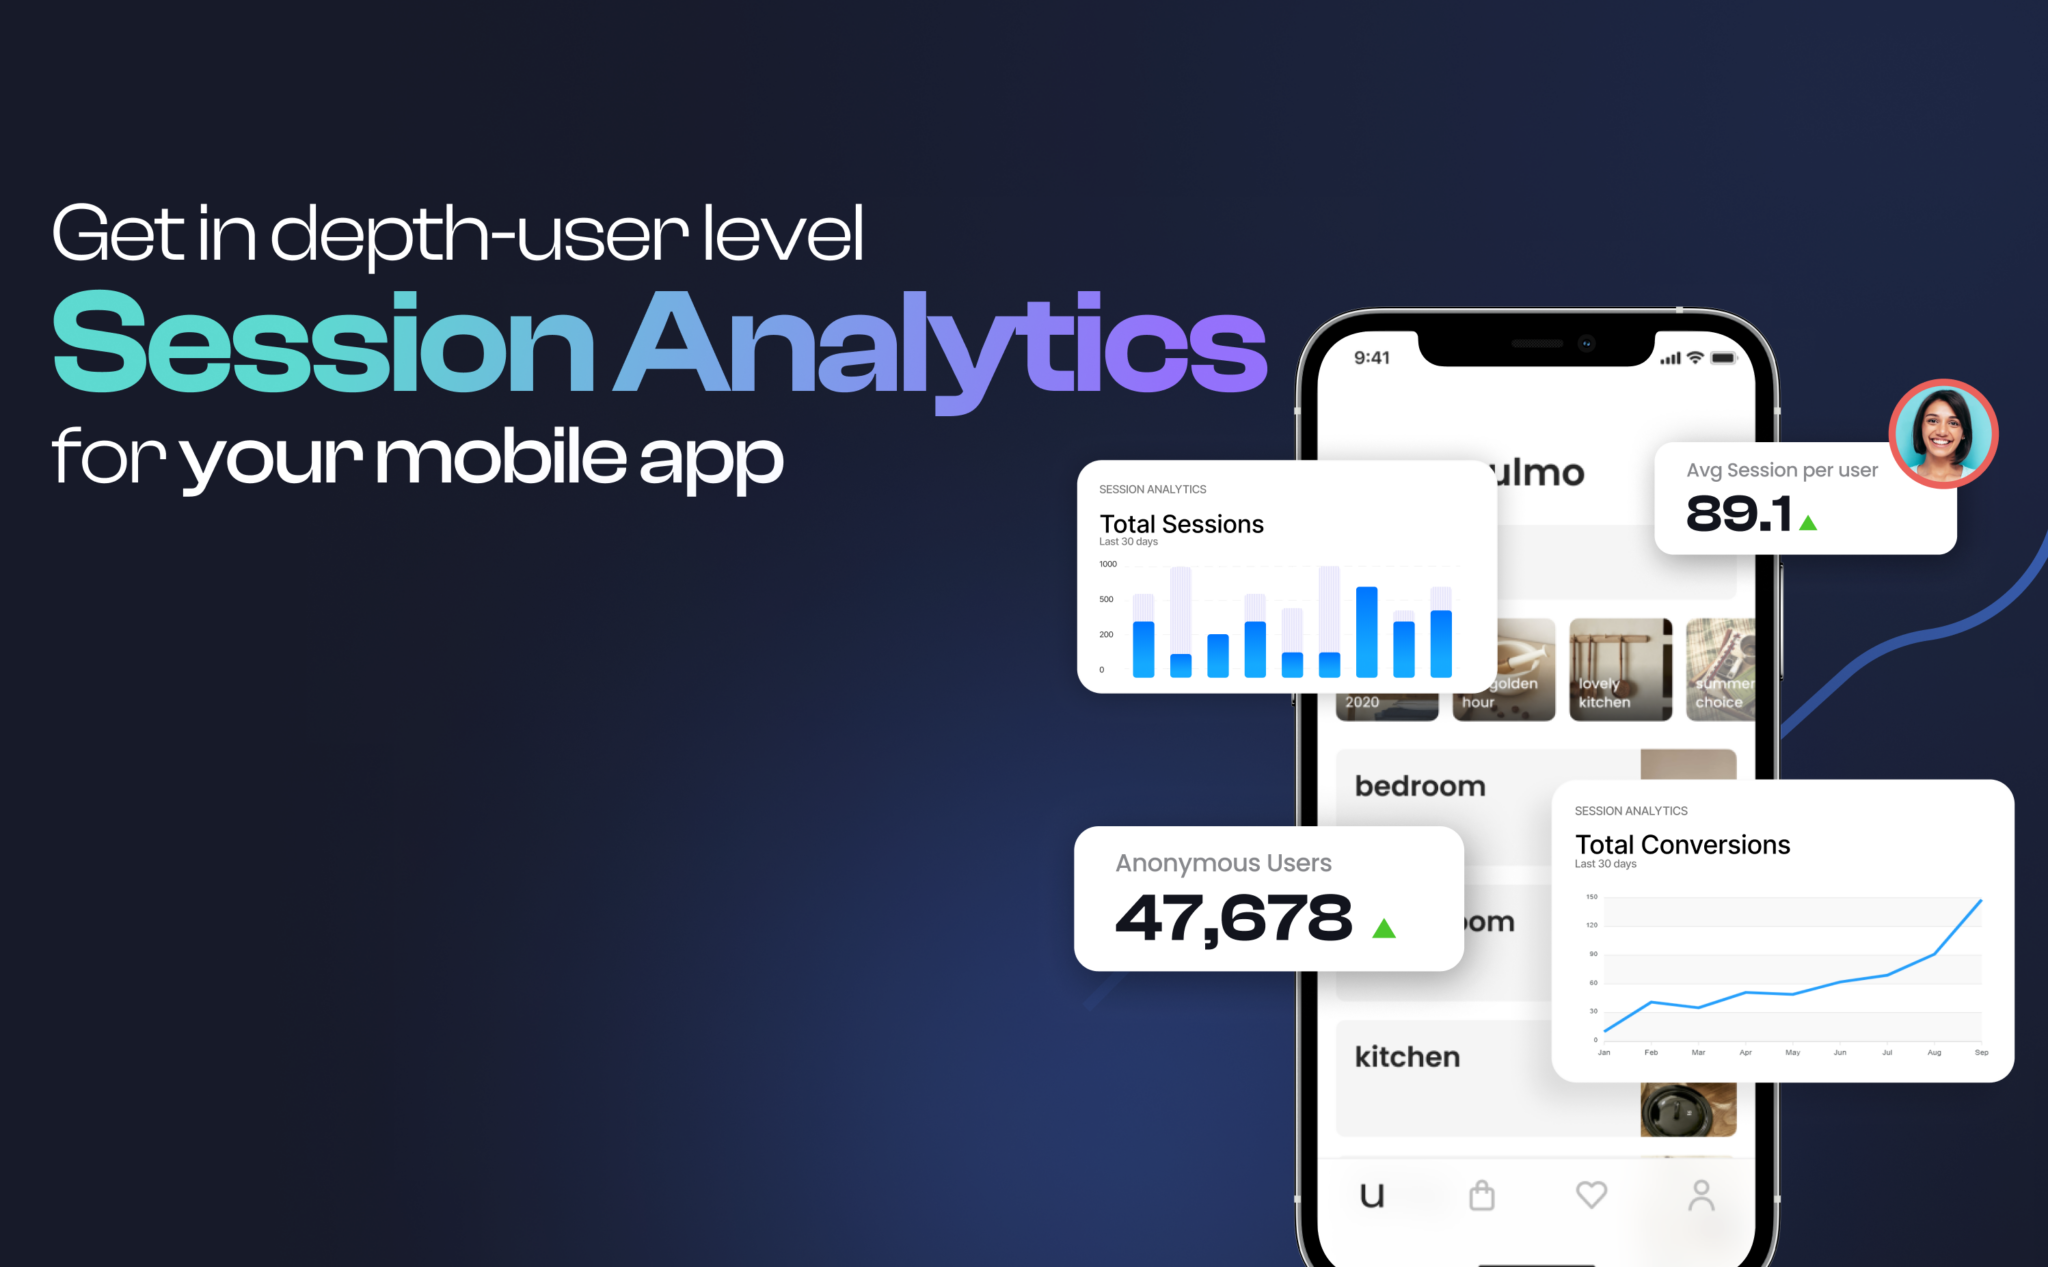 product-update: 🔥🚀 Introducing Session Analytics 📊 for Mobile Apps📱